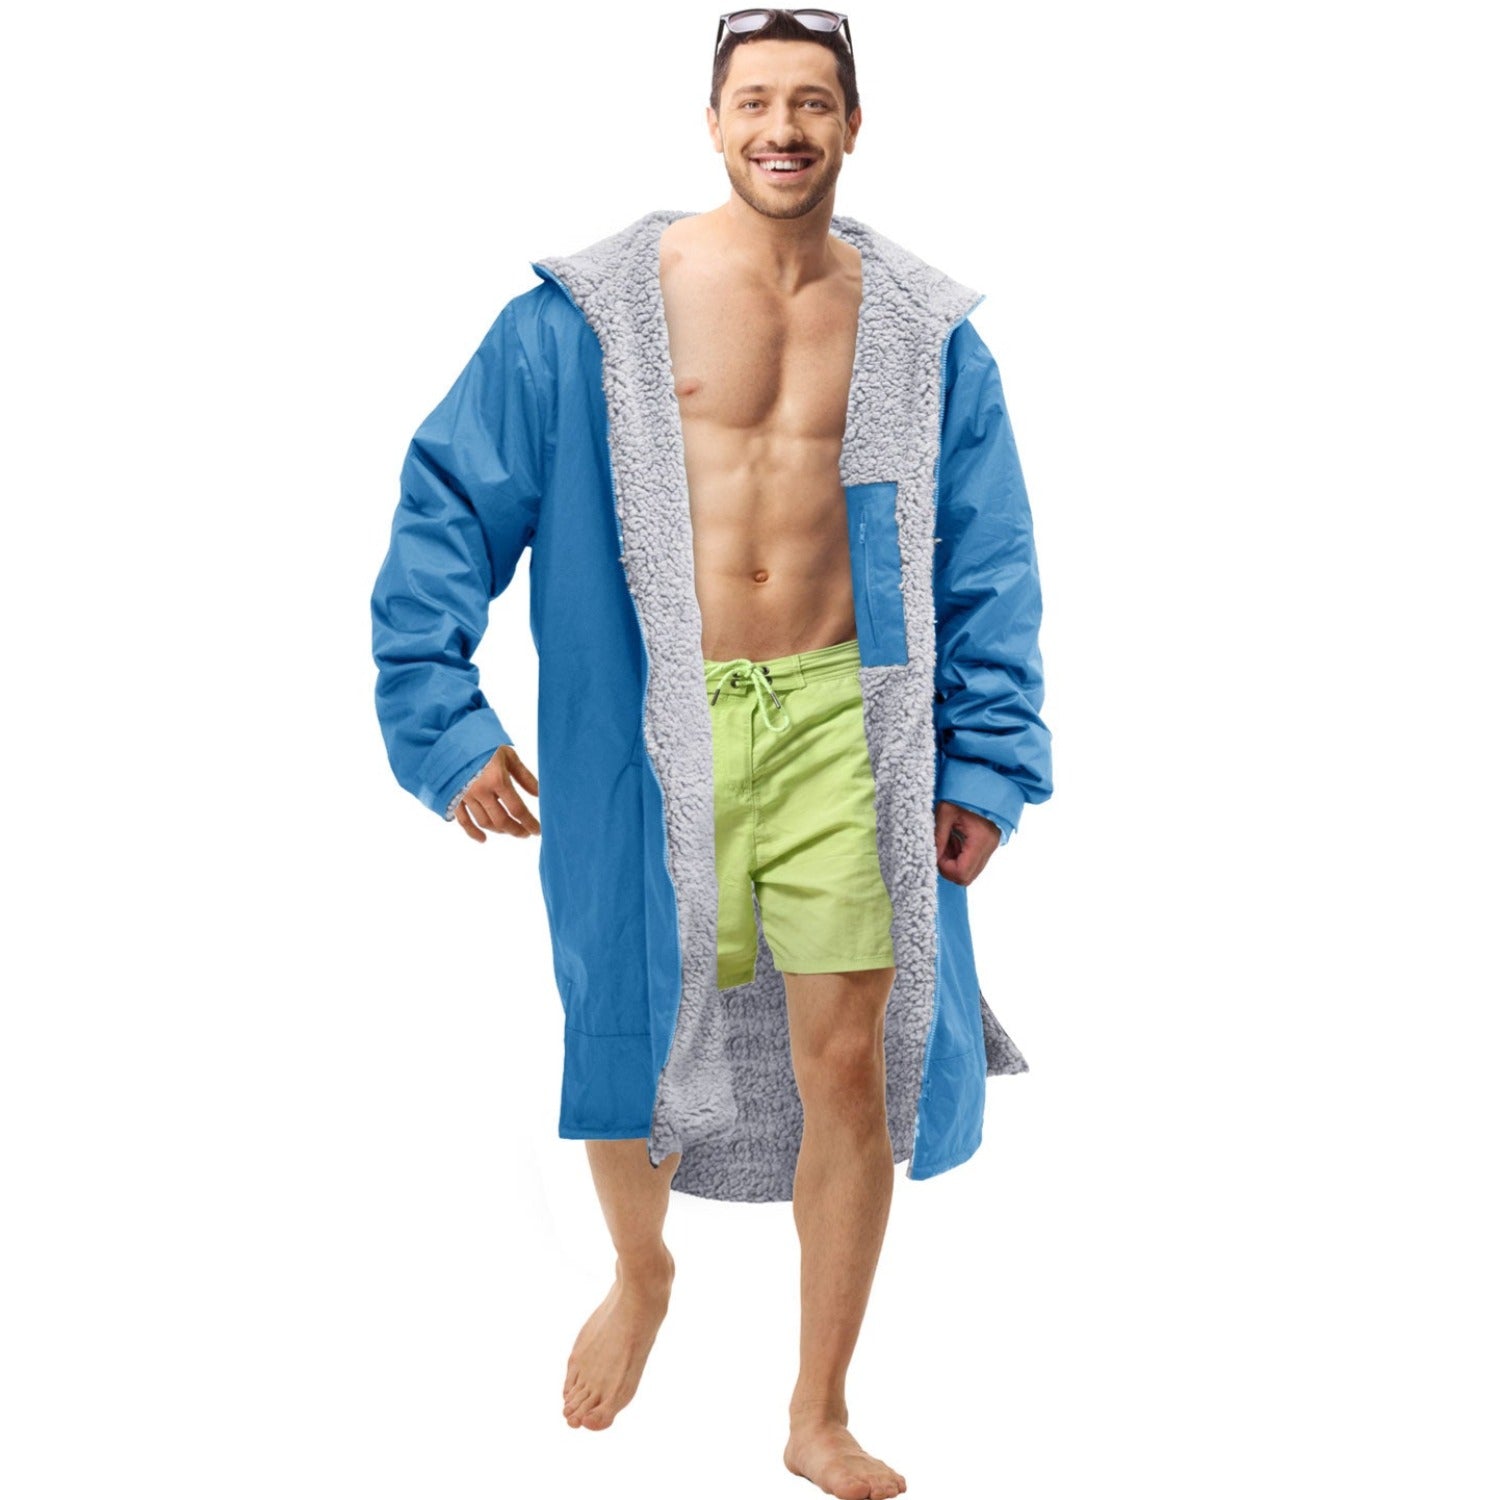 The Home Collection Dry Changing Robe - Turquoise 1 Shaws Department Stores